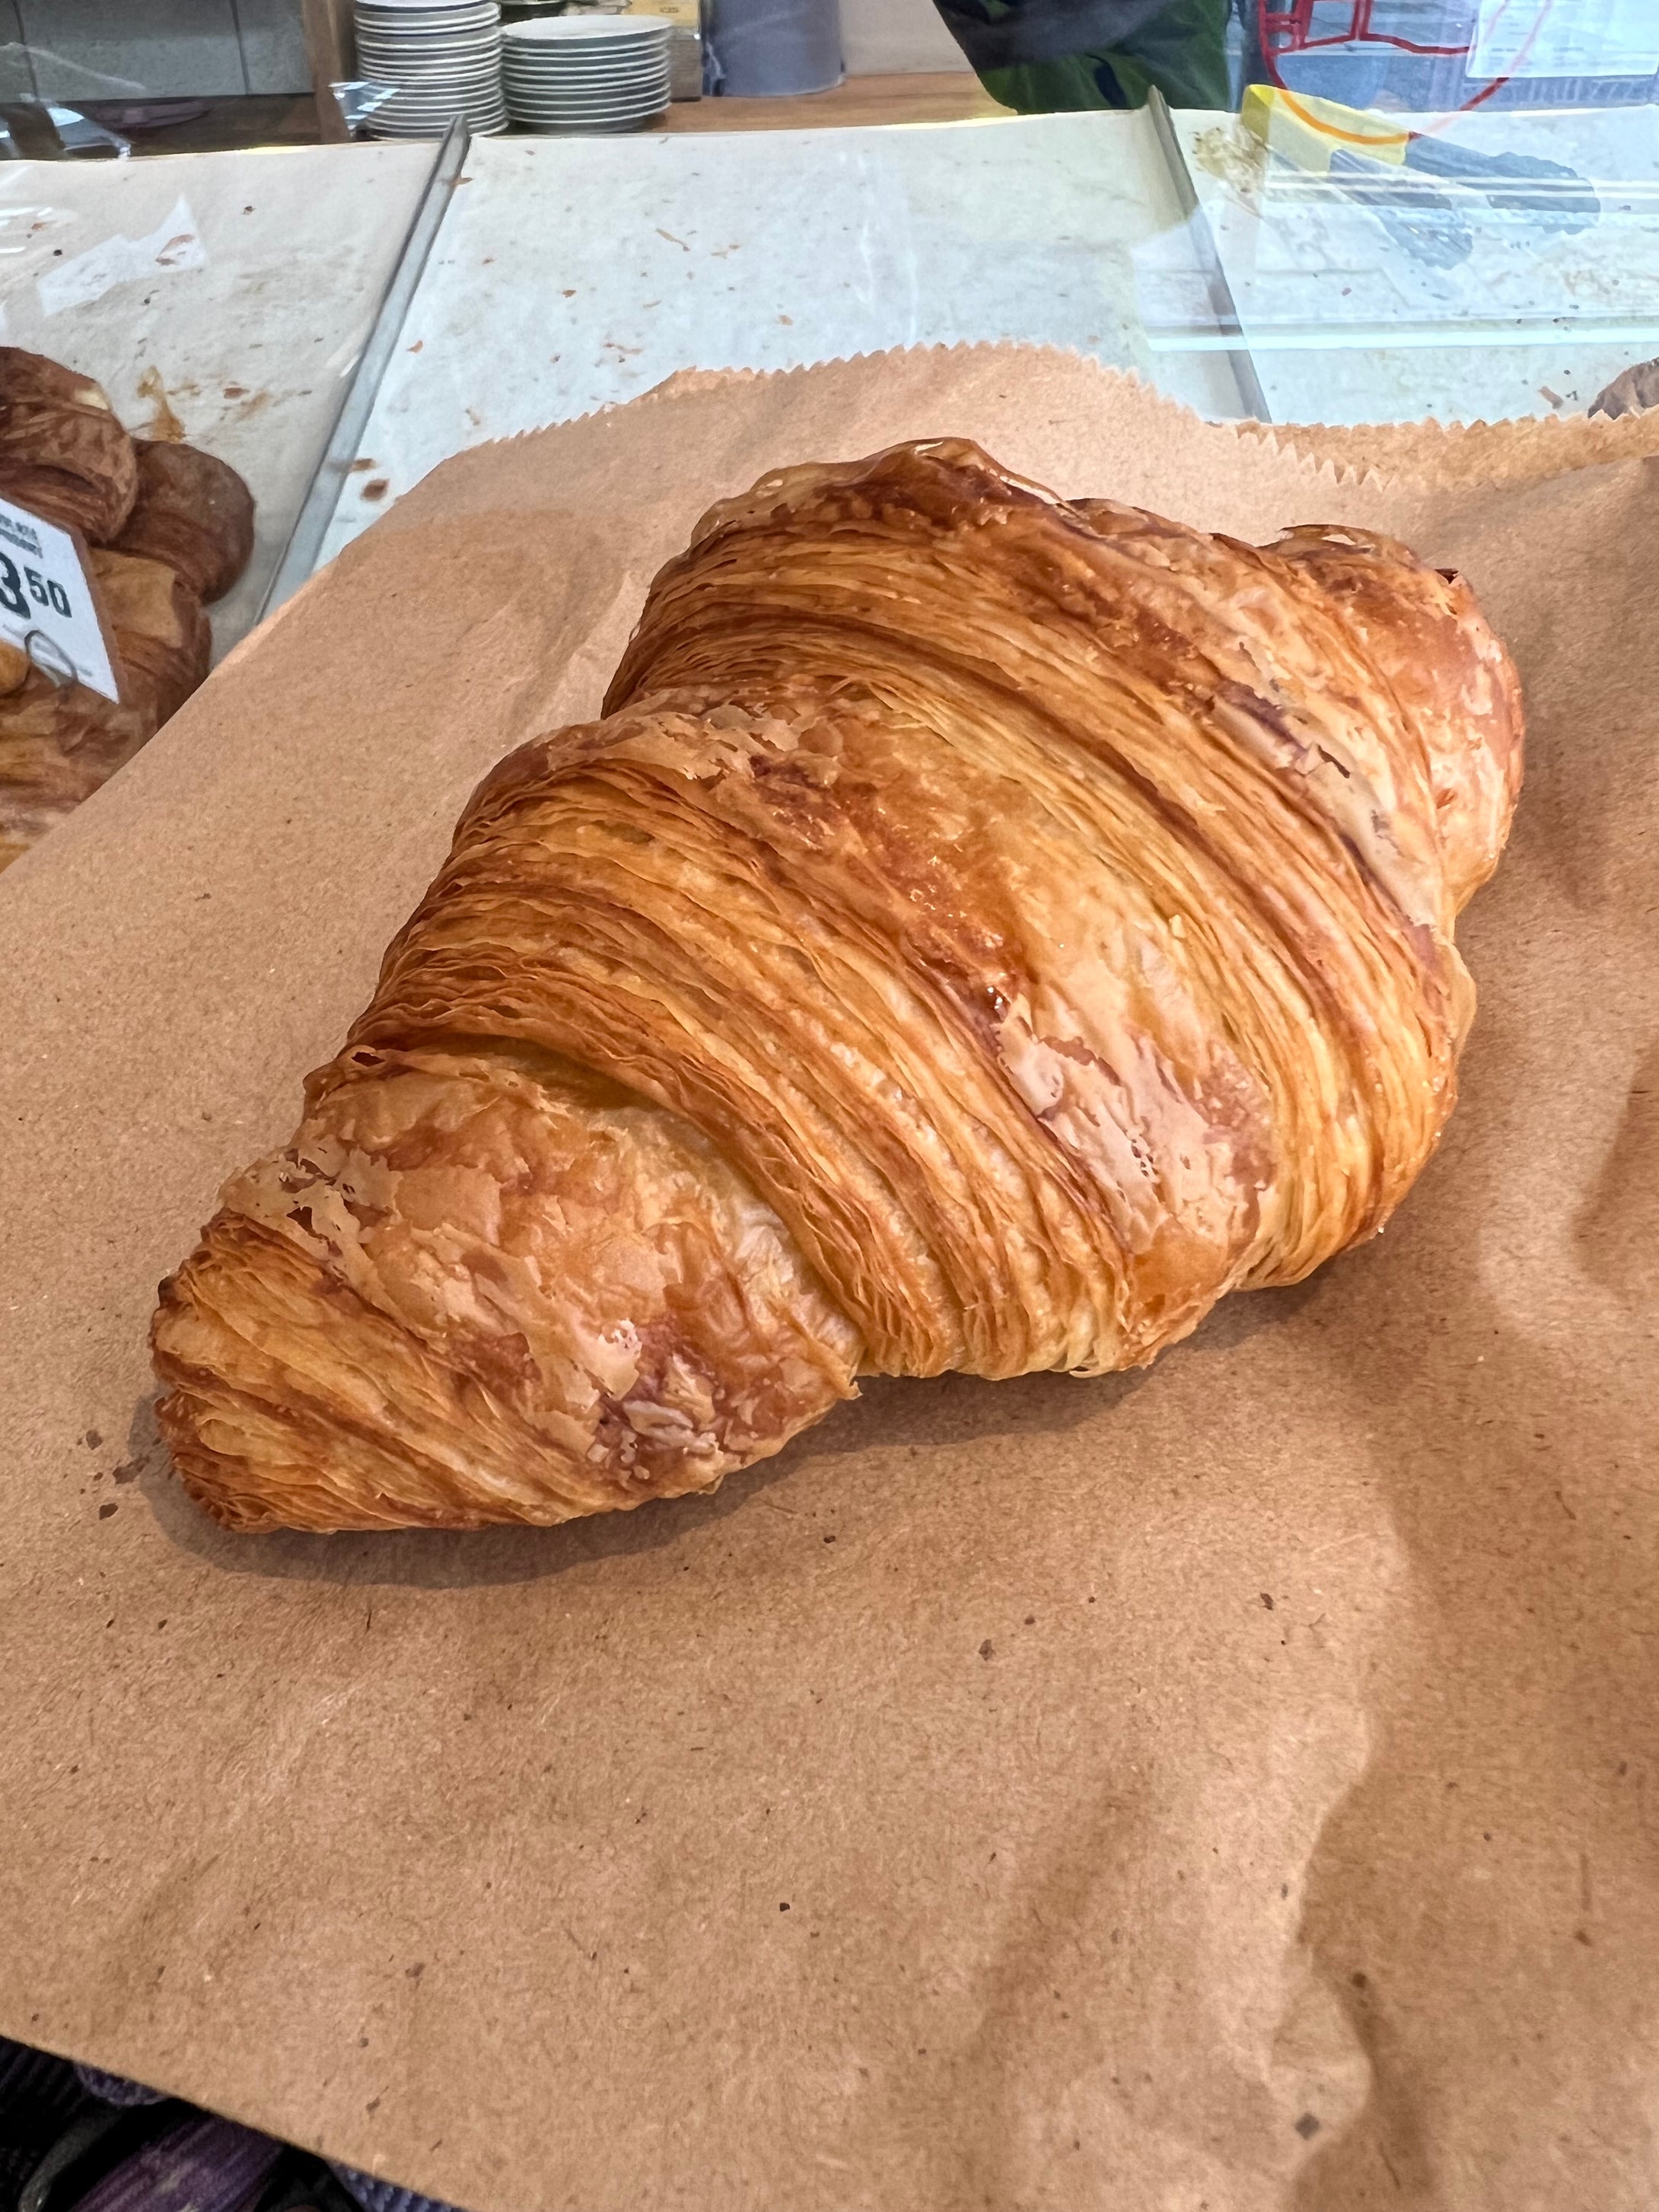 An extra croissant